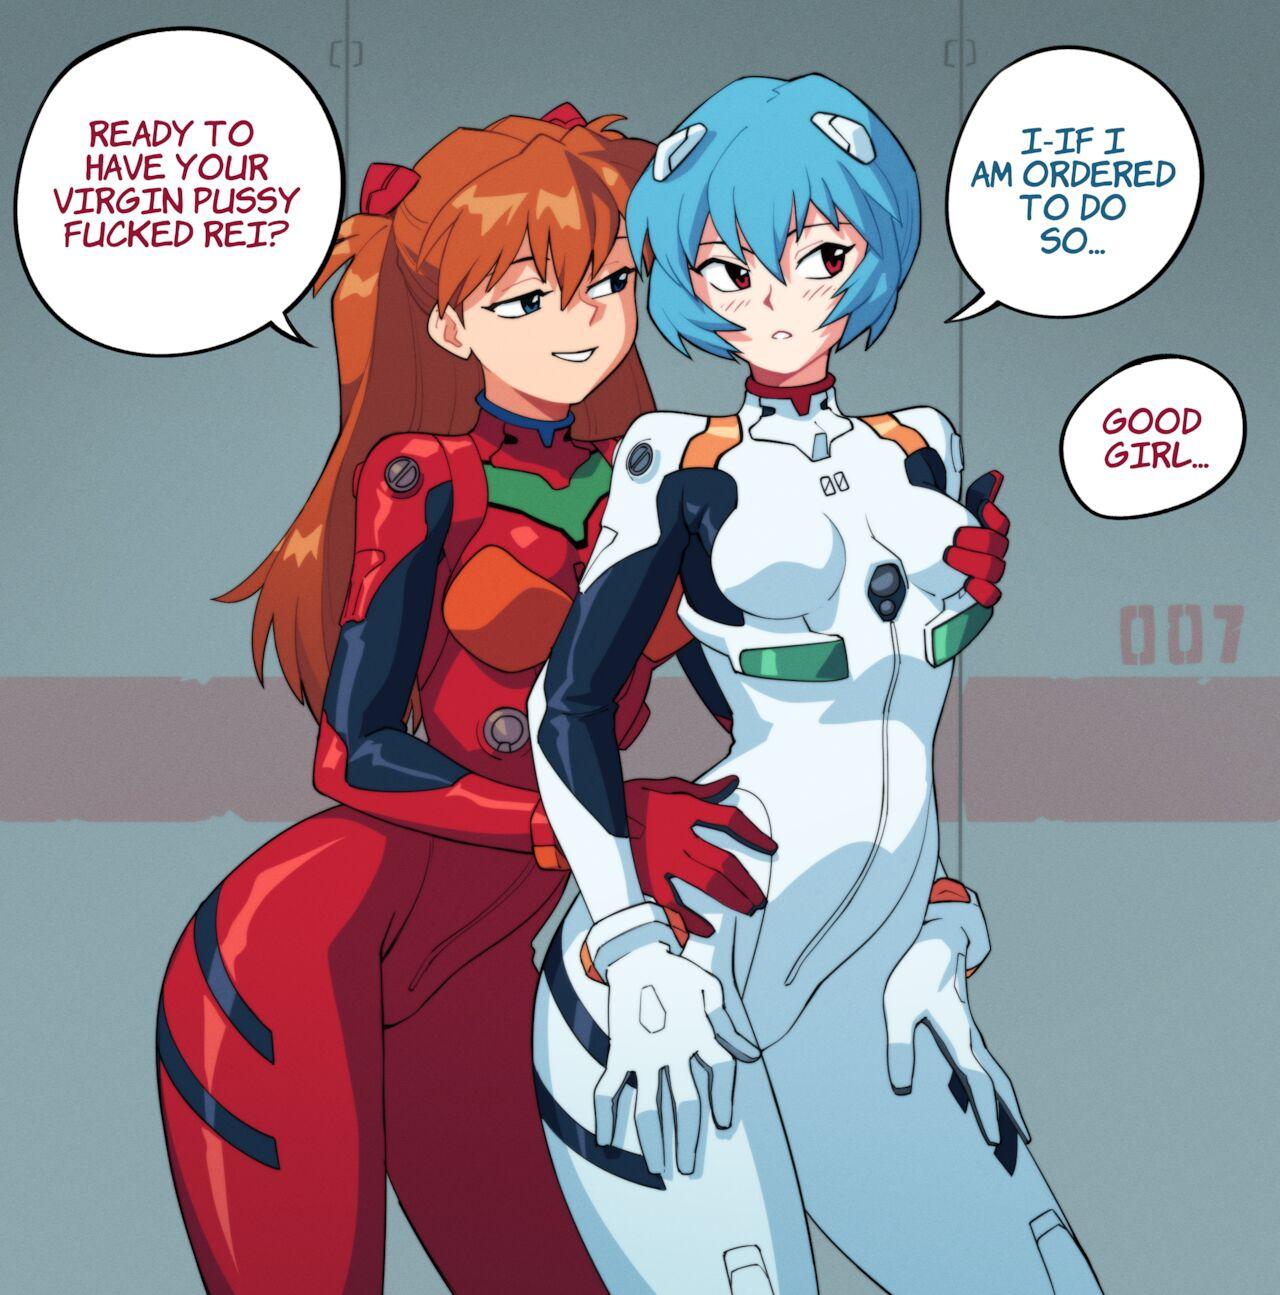 Hot Whores You Can (Not) Resist [+18] by suioresnuart - Neon genesis evangelion Assfingering - Page 2